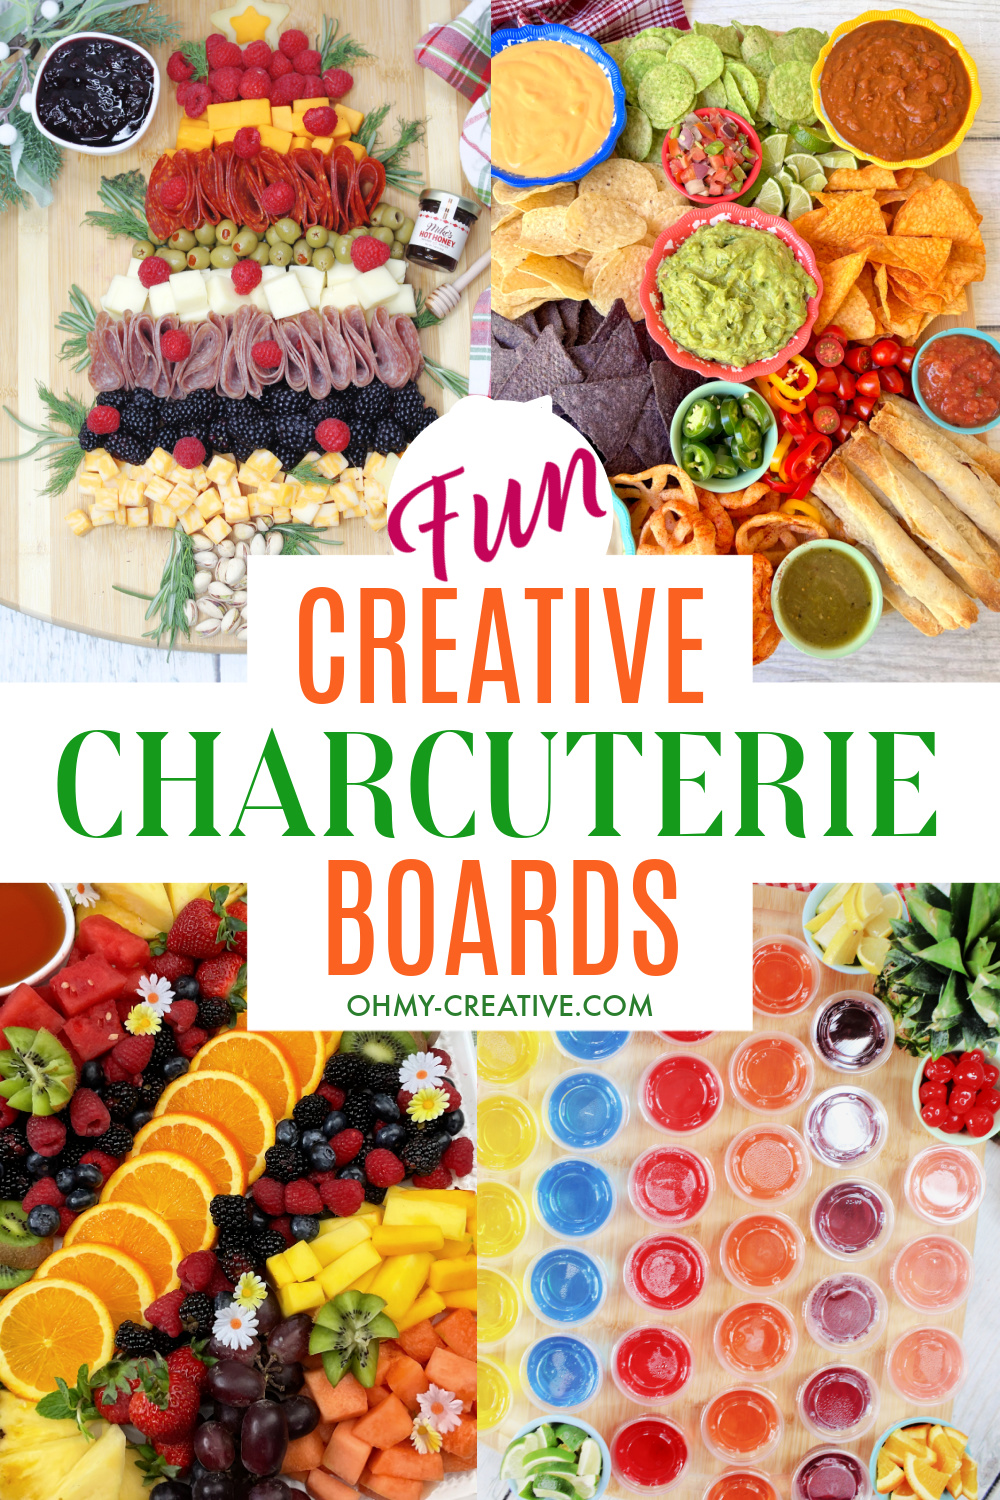 A collage of creative charcuterie boards including an fruit charcuterie board, jello shot charcuterie board, Christmas tree shaped charcuterie board and a Mexican charcuterie board.